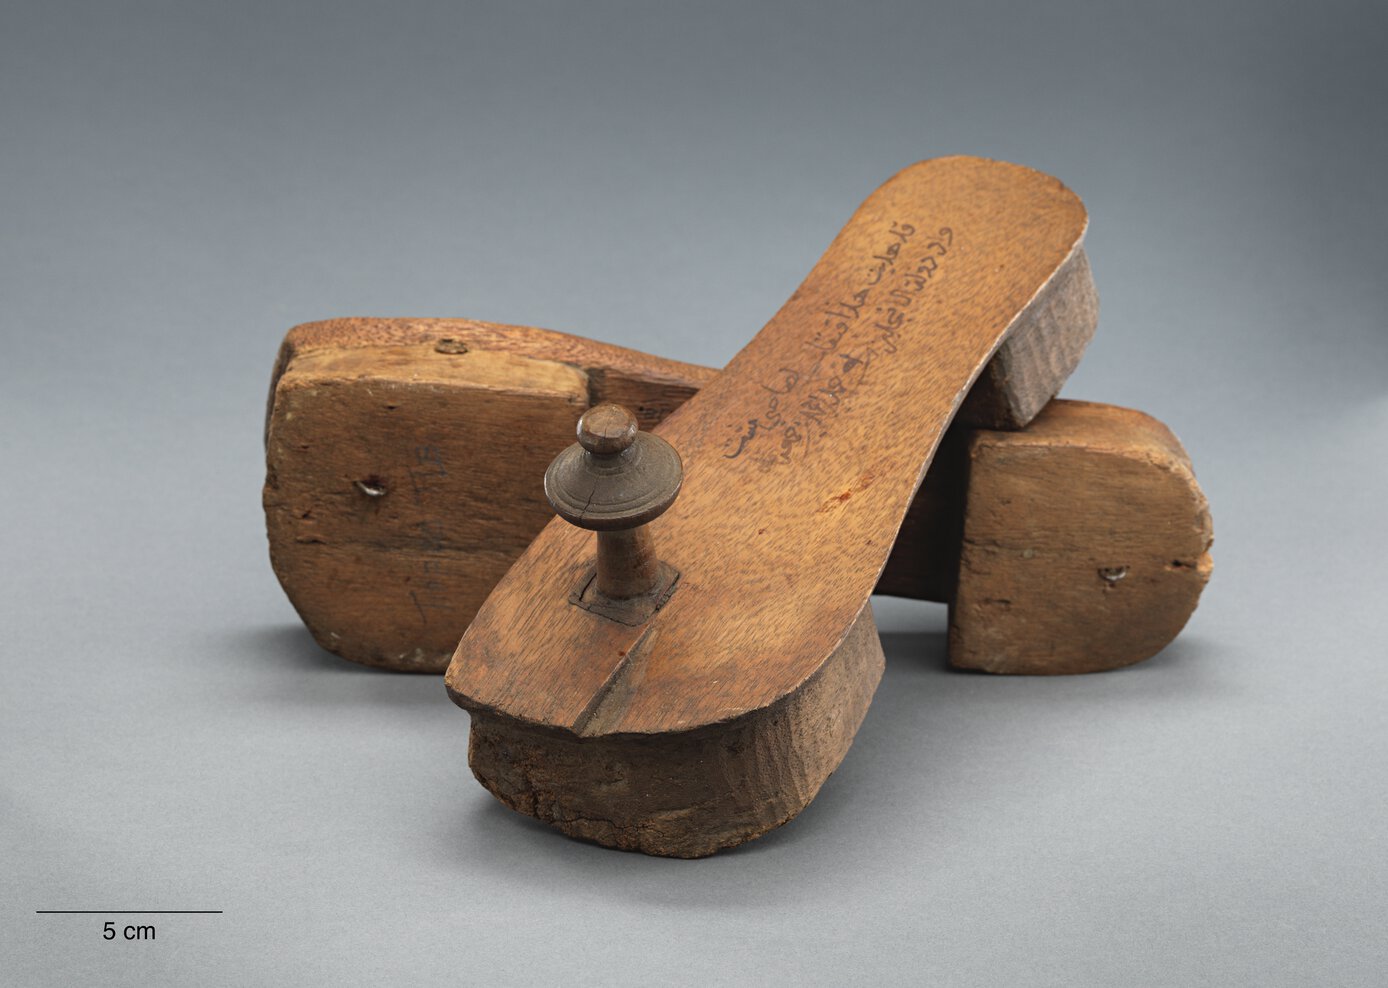 Tippu Tip's inscribed clogs, one placed on its side, the other with its heel on the first.